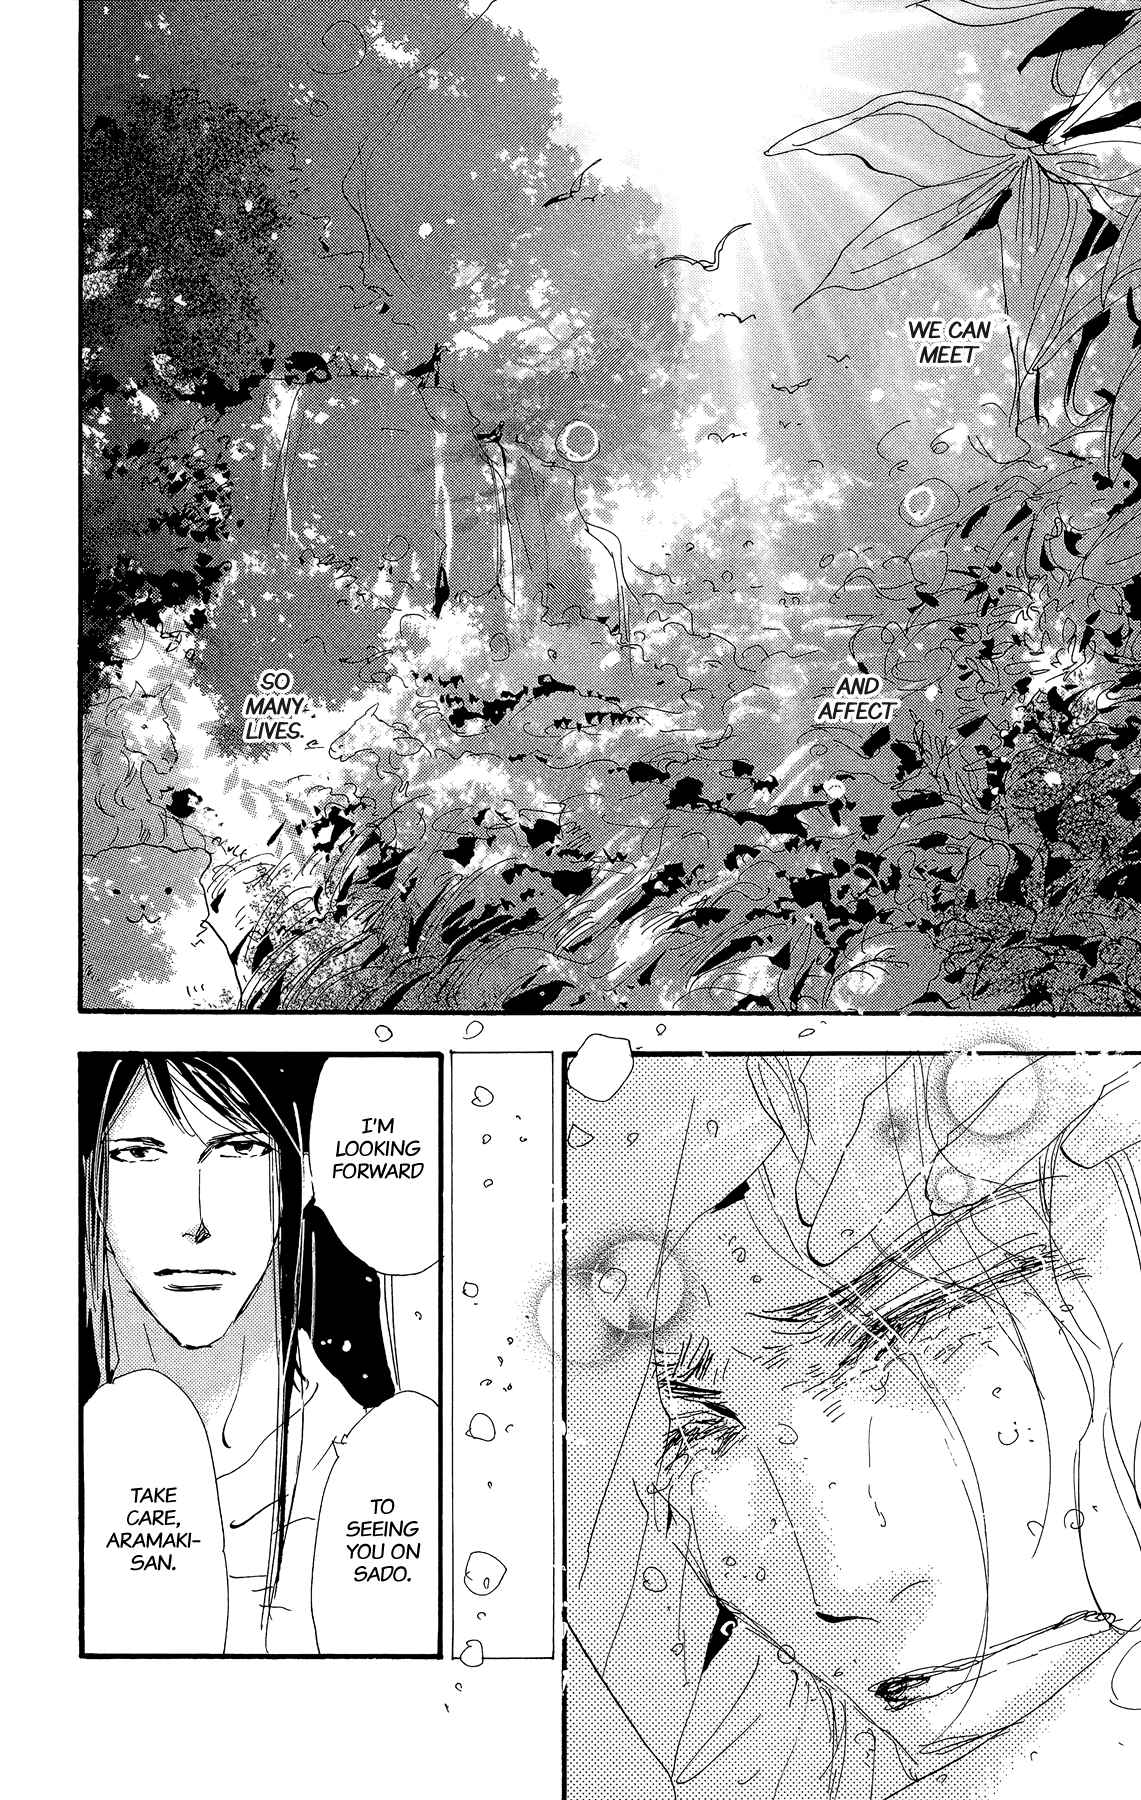 7 Seeds Vol. 33 Ch. 170 Sky Chapter 7 [Life]